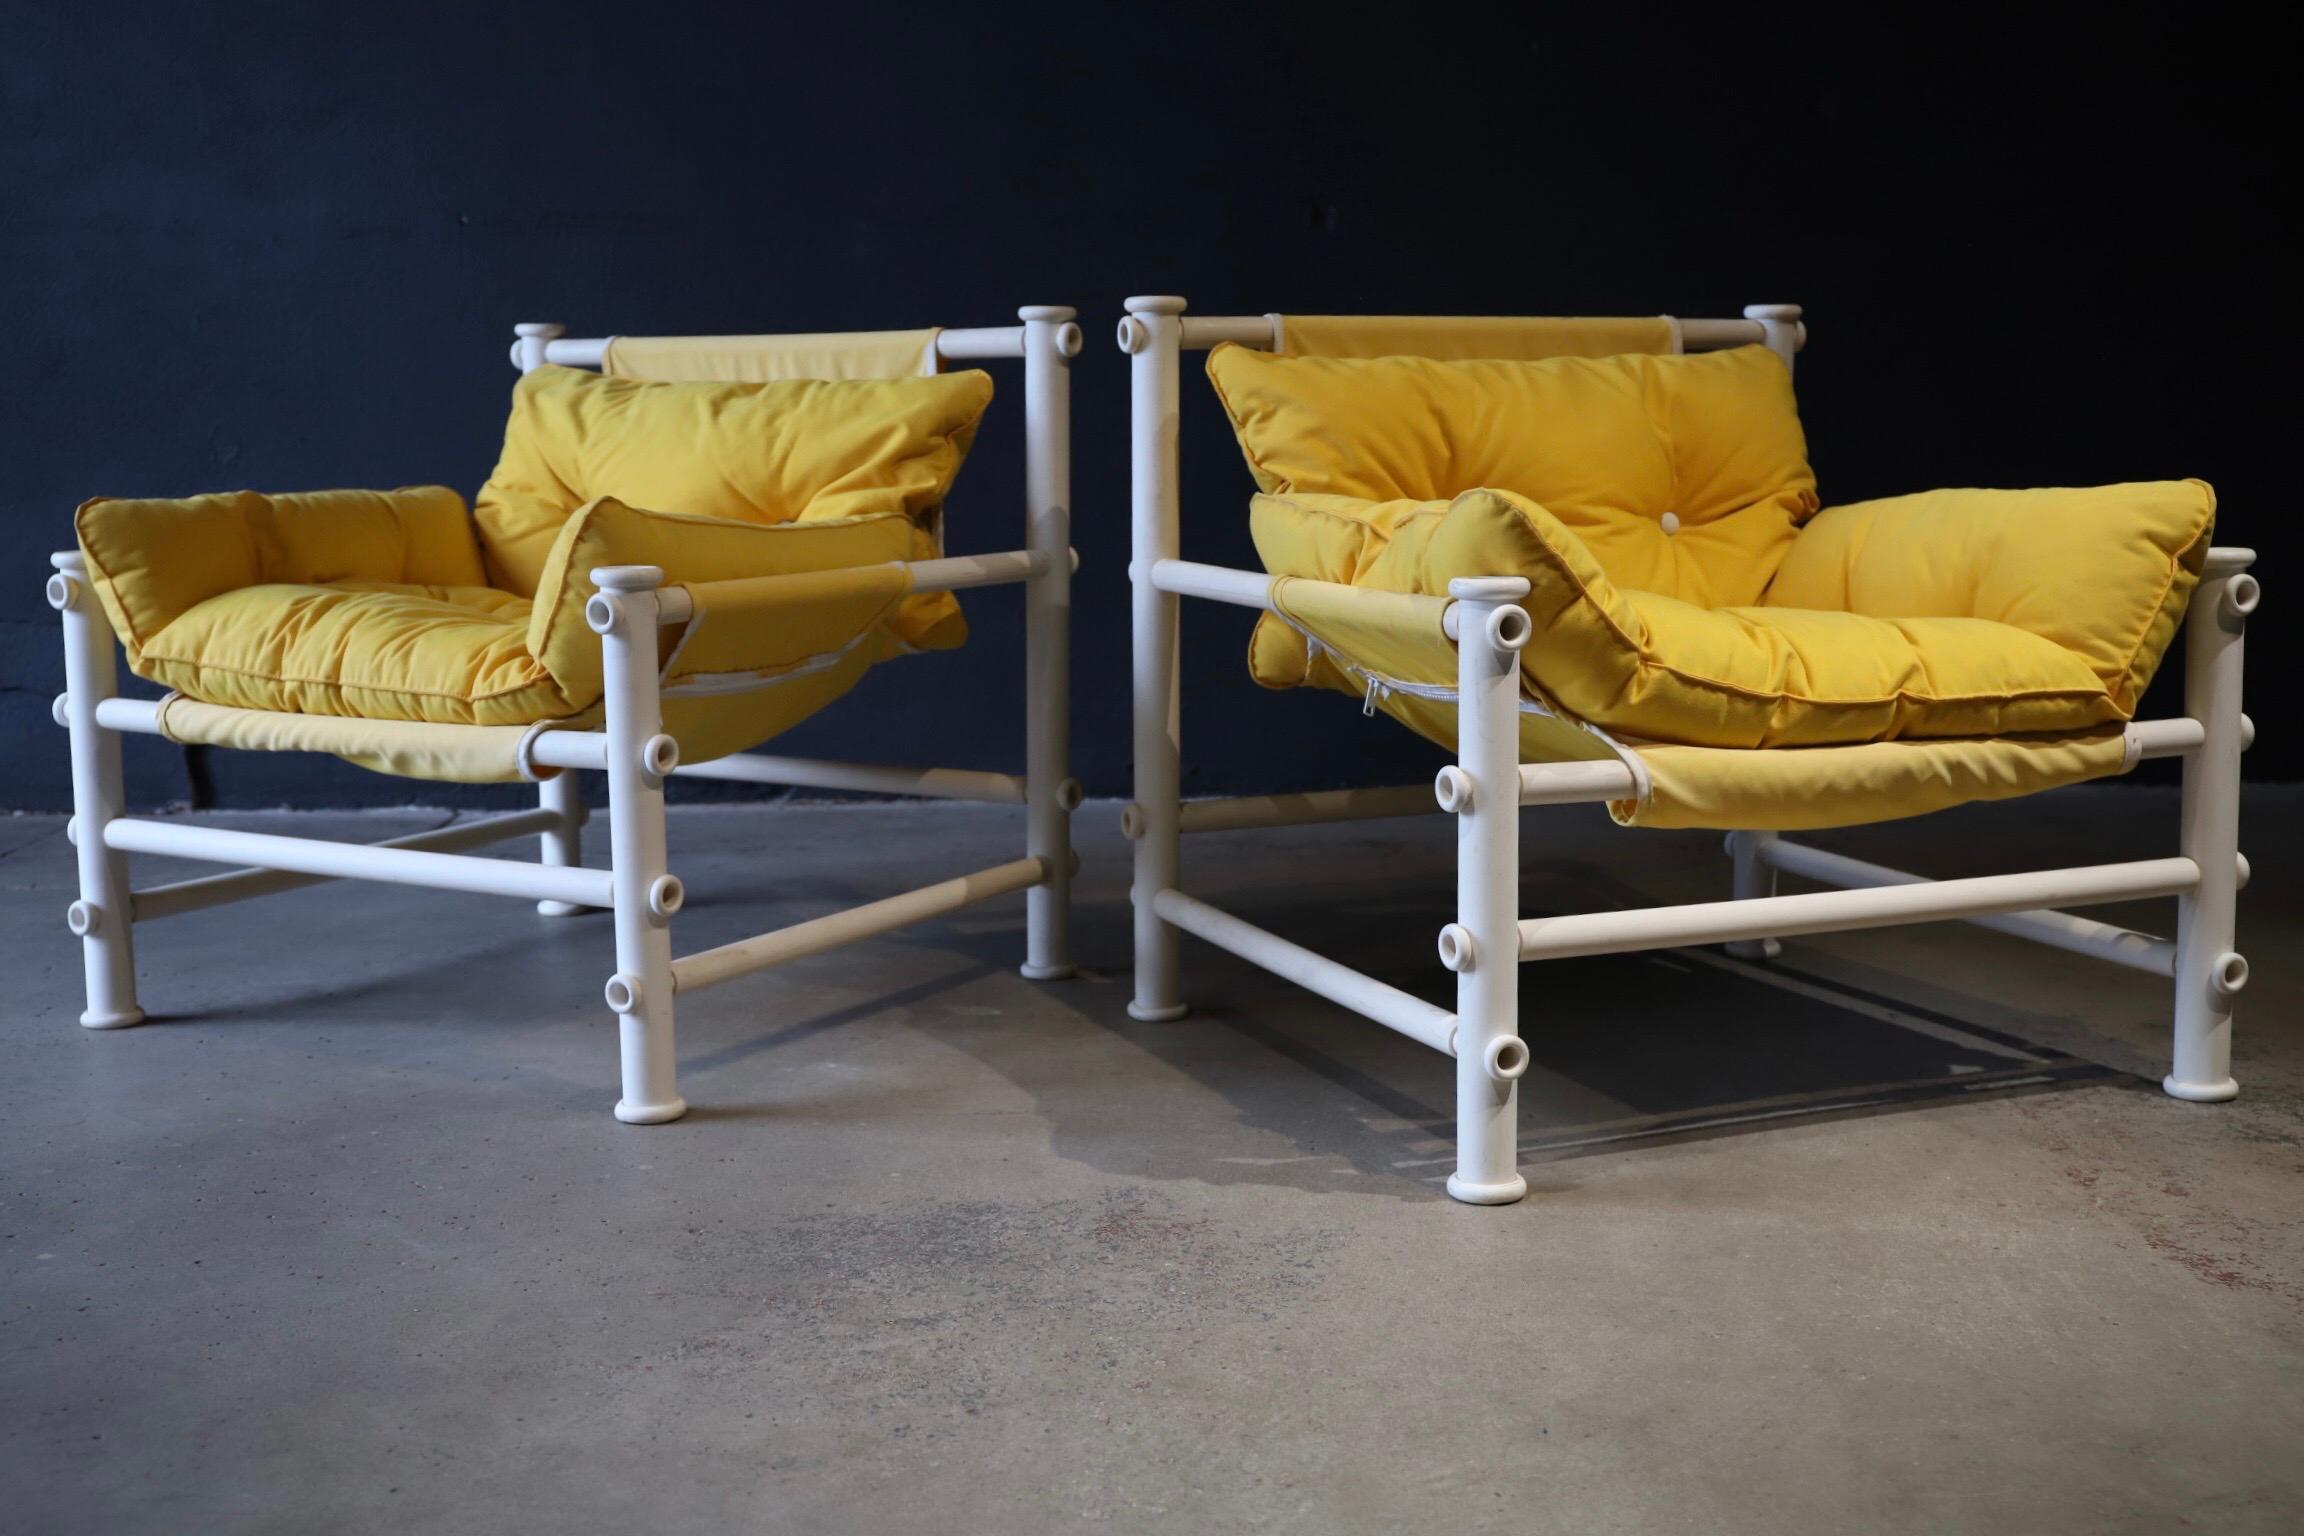 pvc pipe chaise lounge